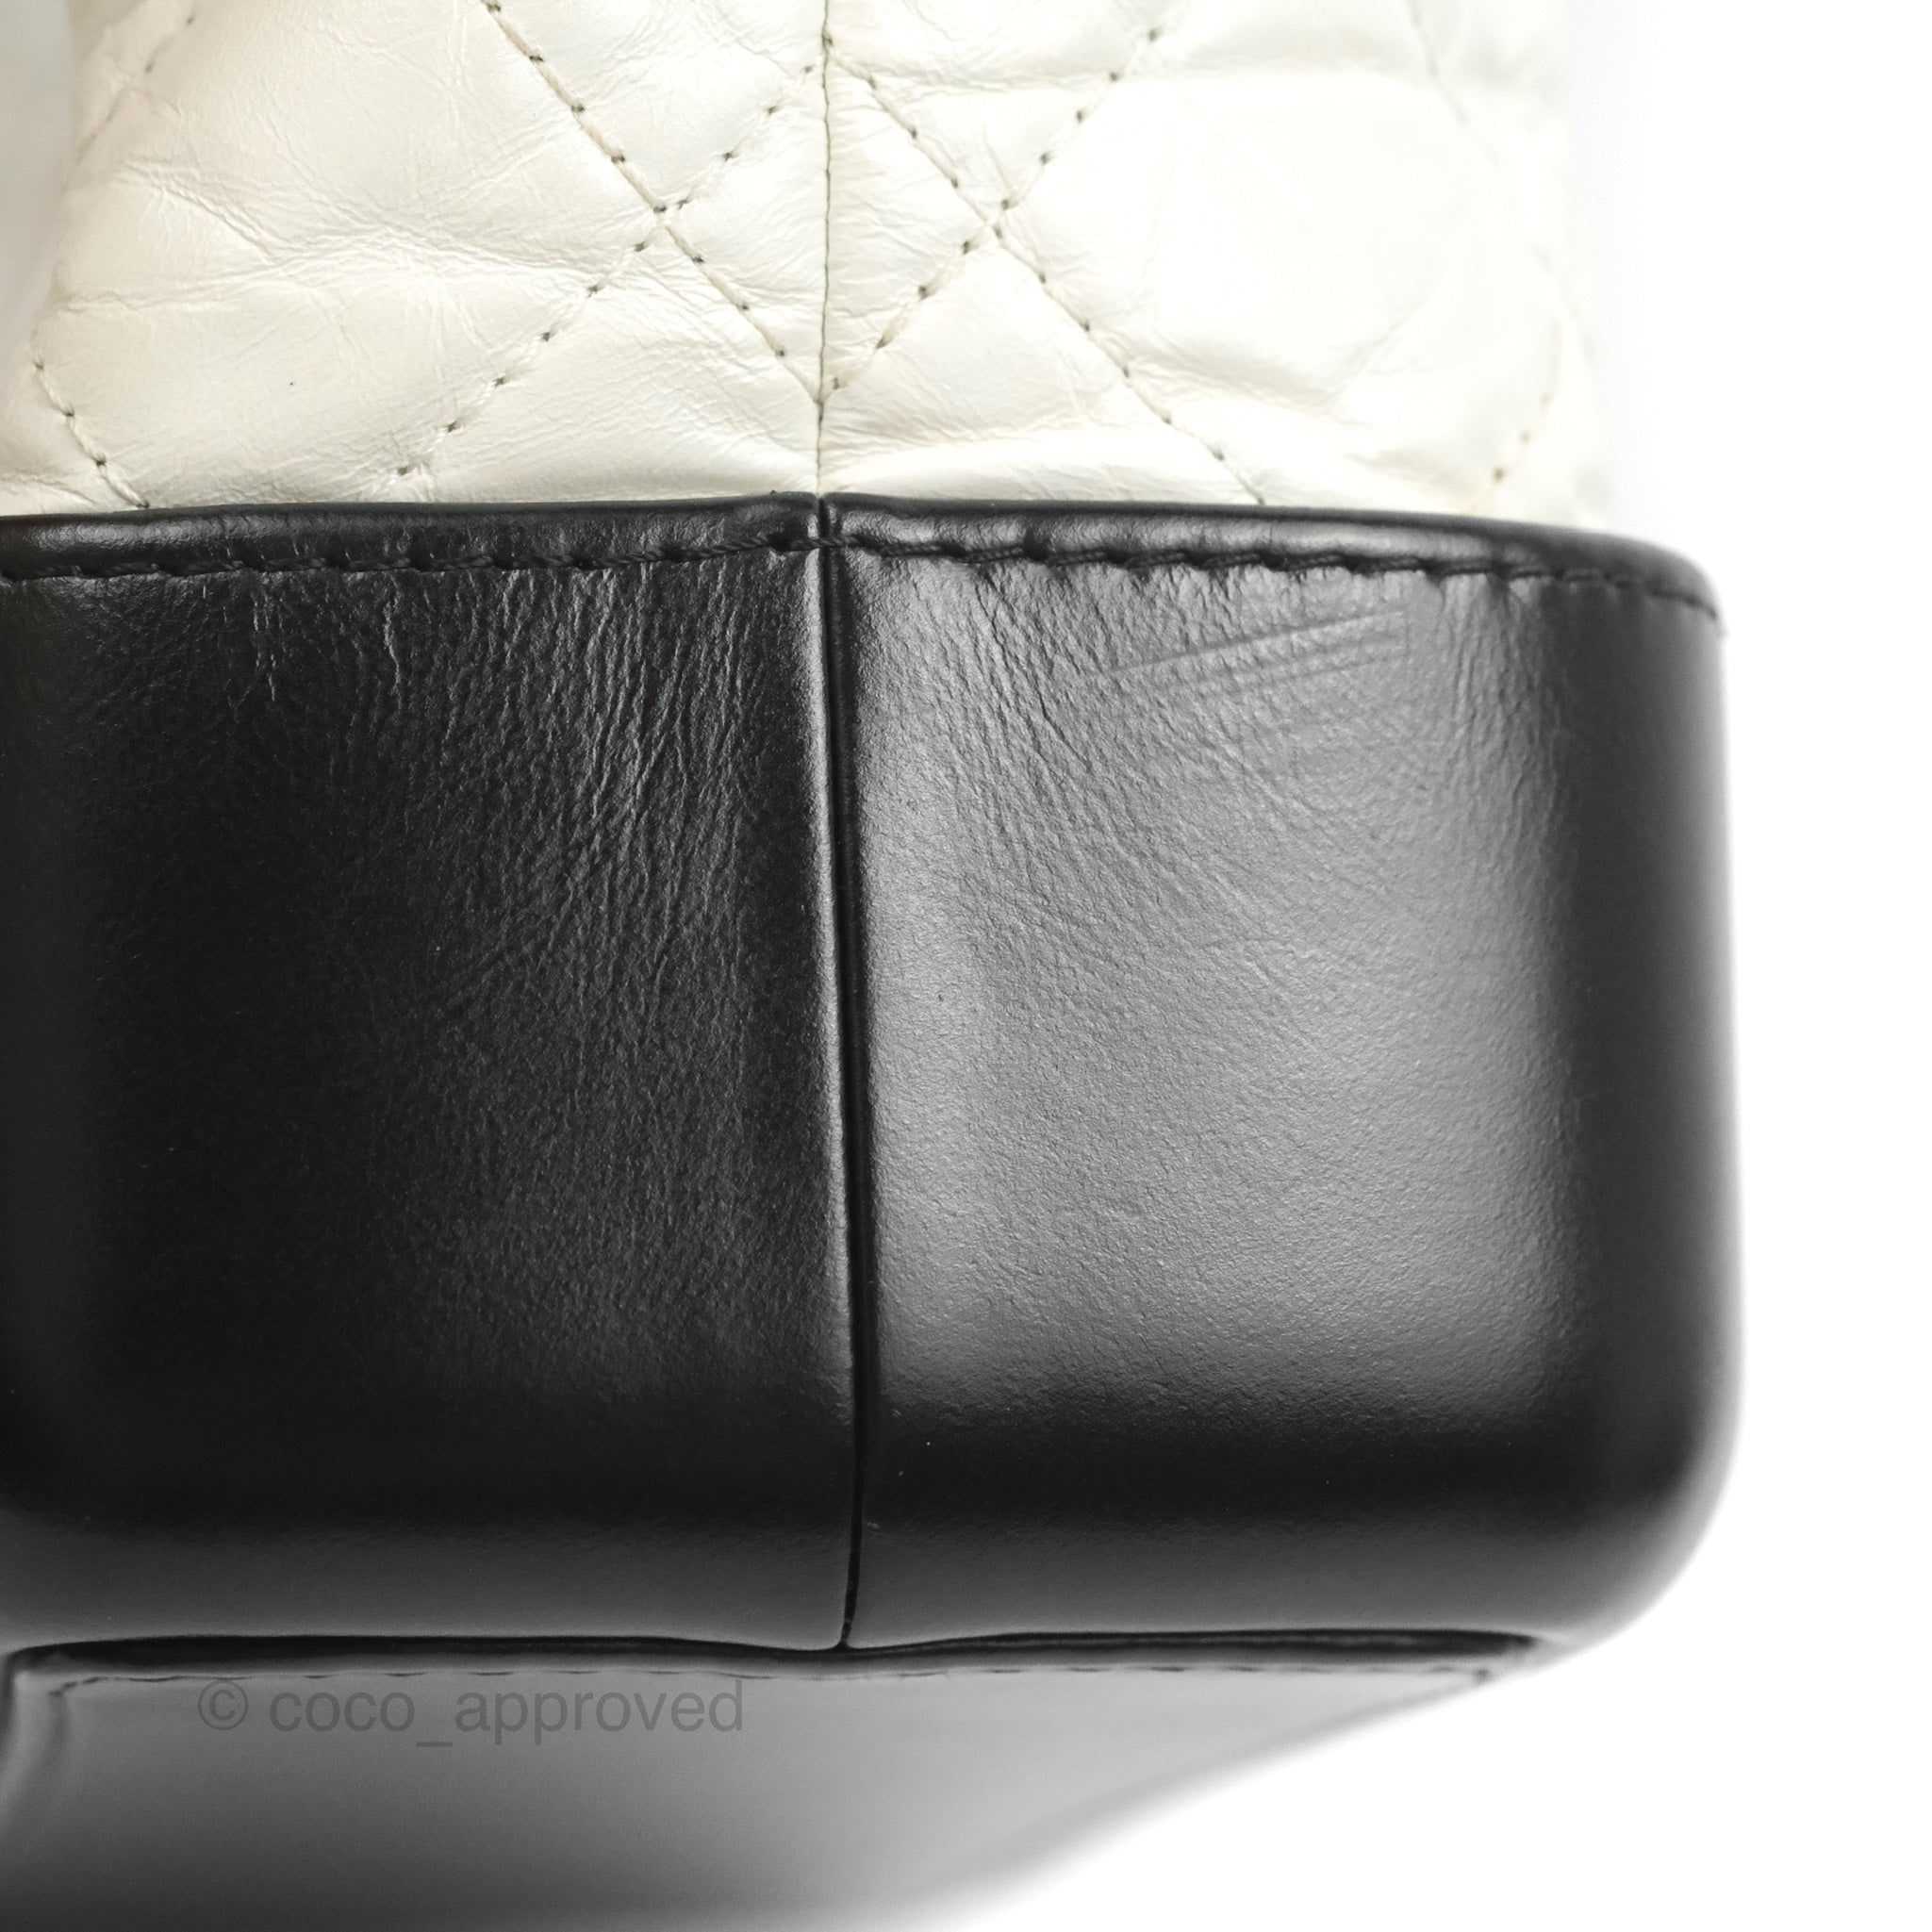 Chanel Small Gabrielle Backpack Black Aged Calfskin – Coco